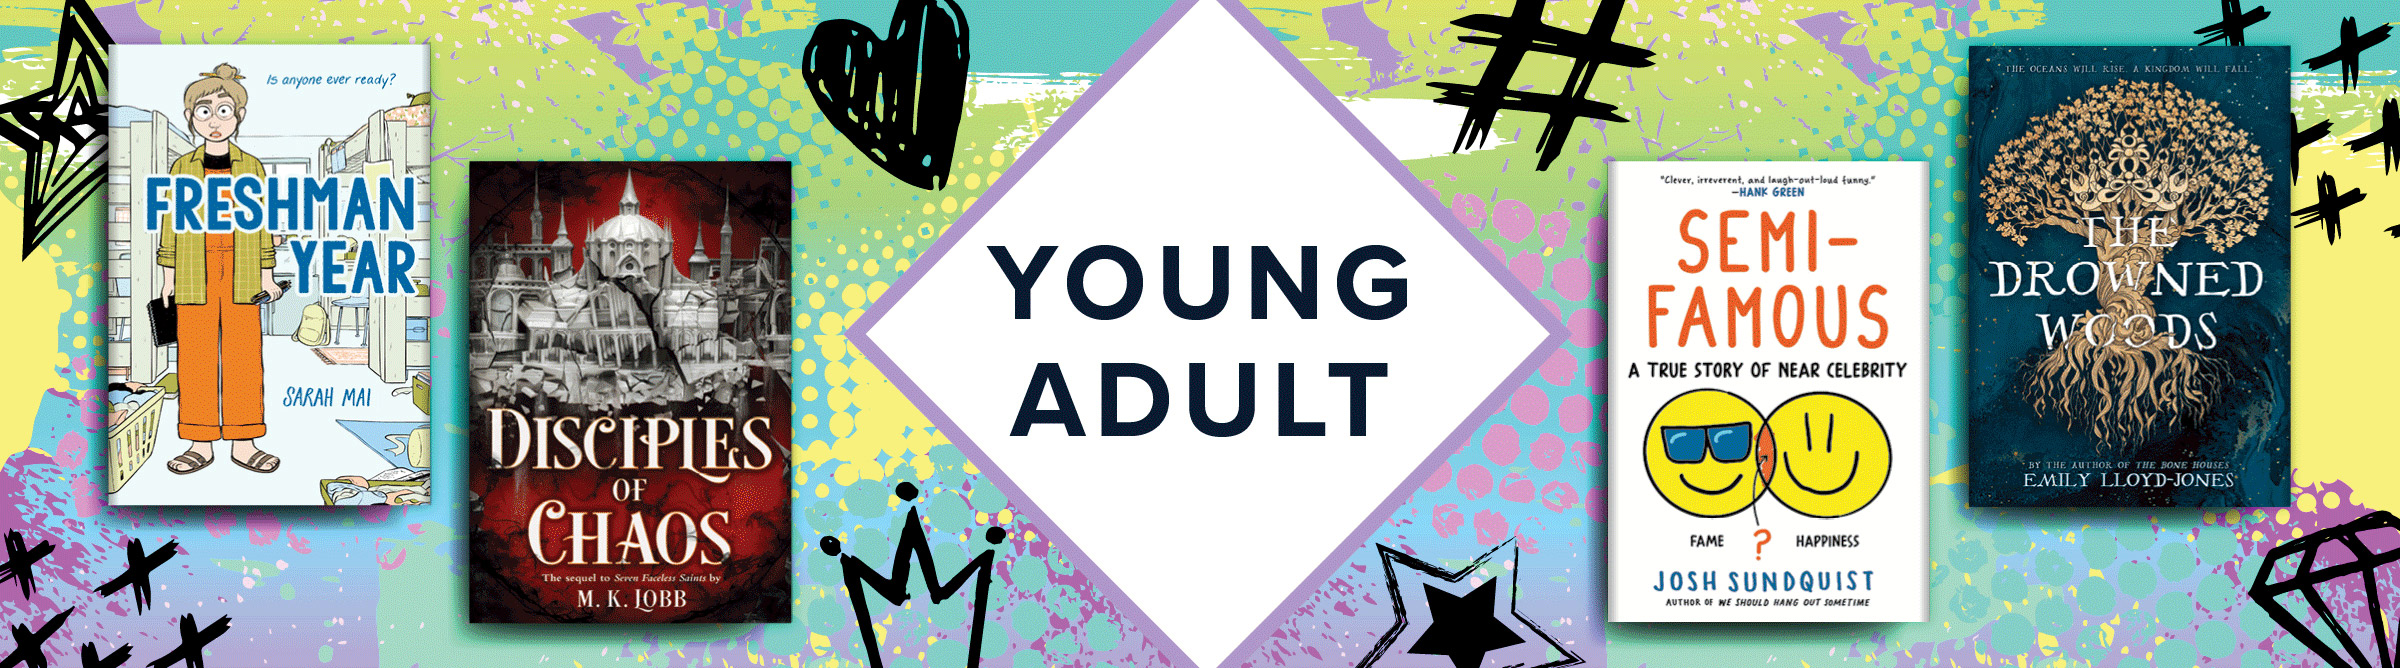 Graphic banner that says "Young Adult" featuring four books: 'Freshman Year' 'Disciples of Chaos' 'Semi-Famous' and 'The Drowned Woods."